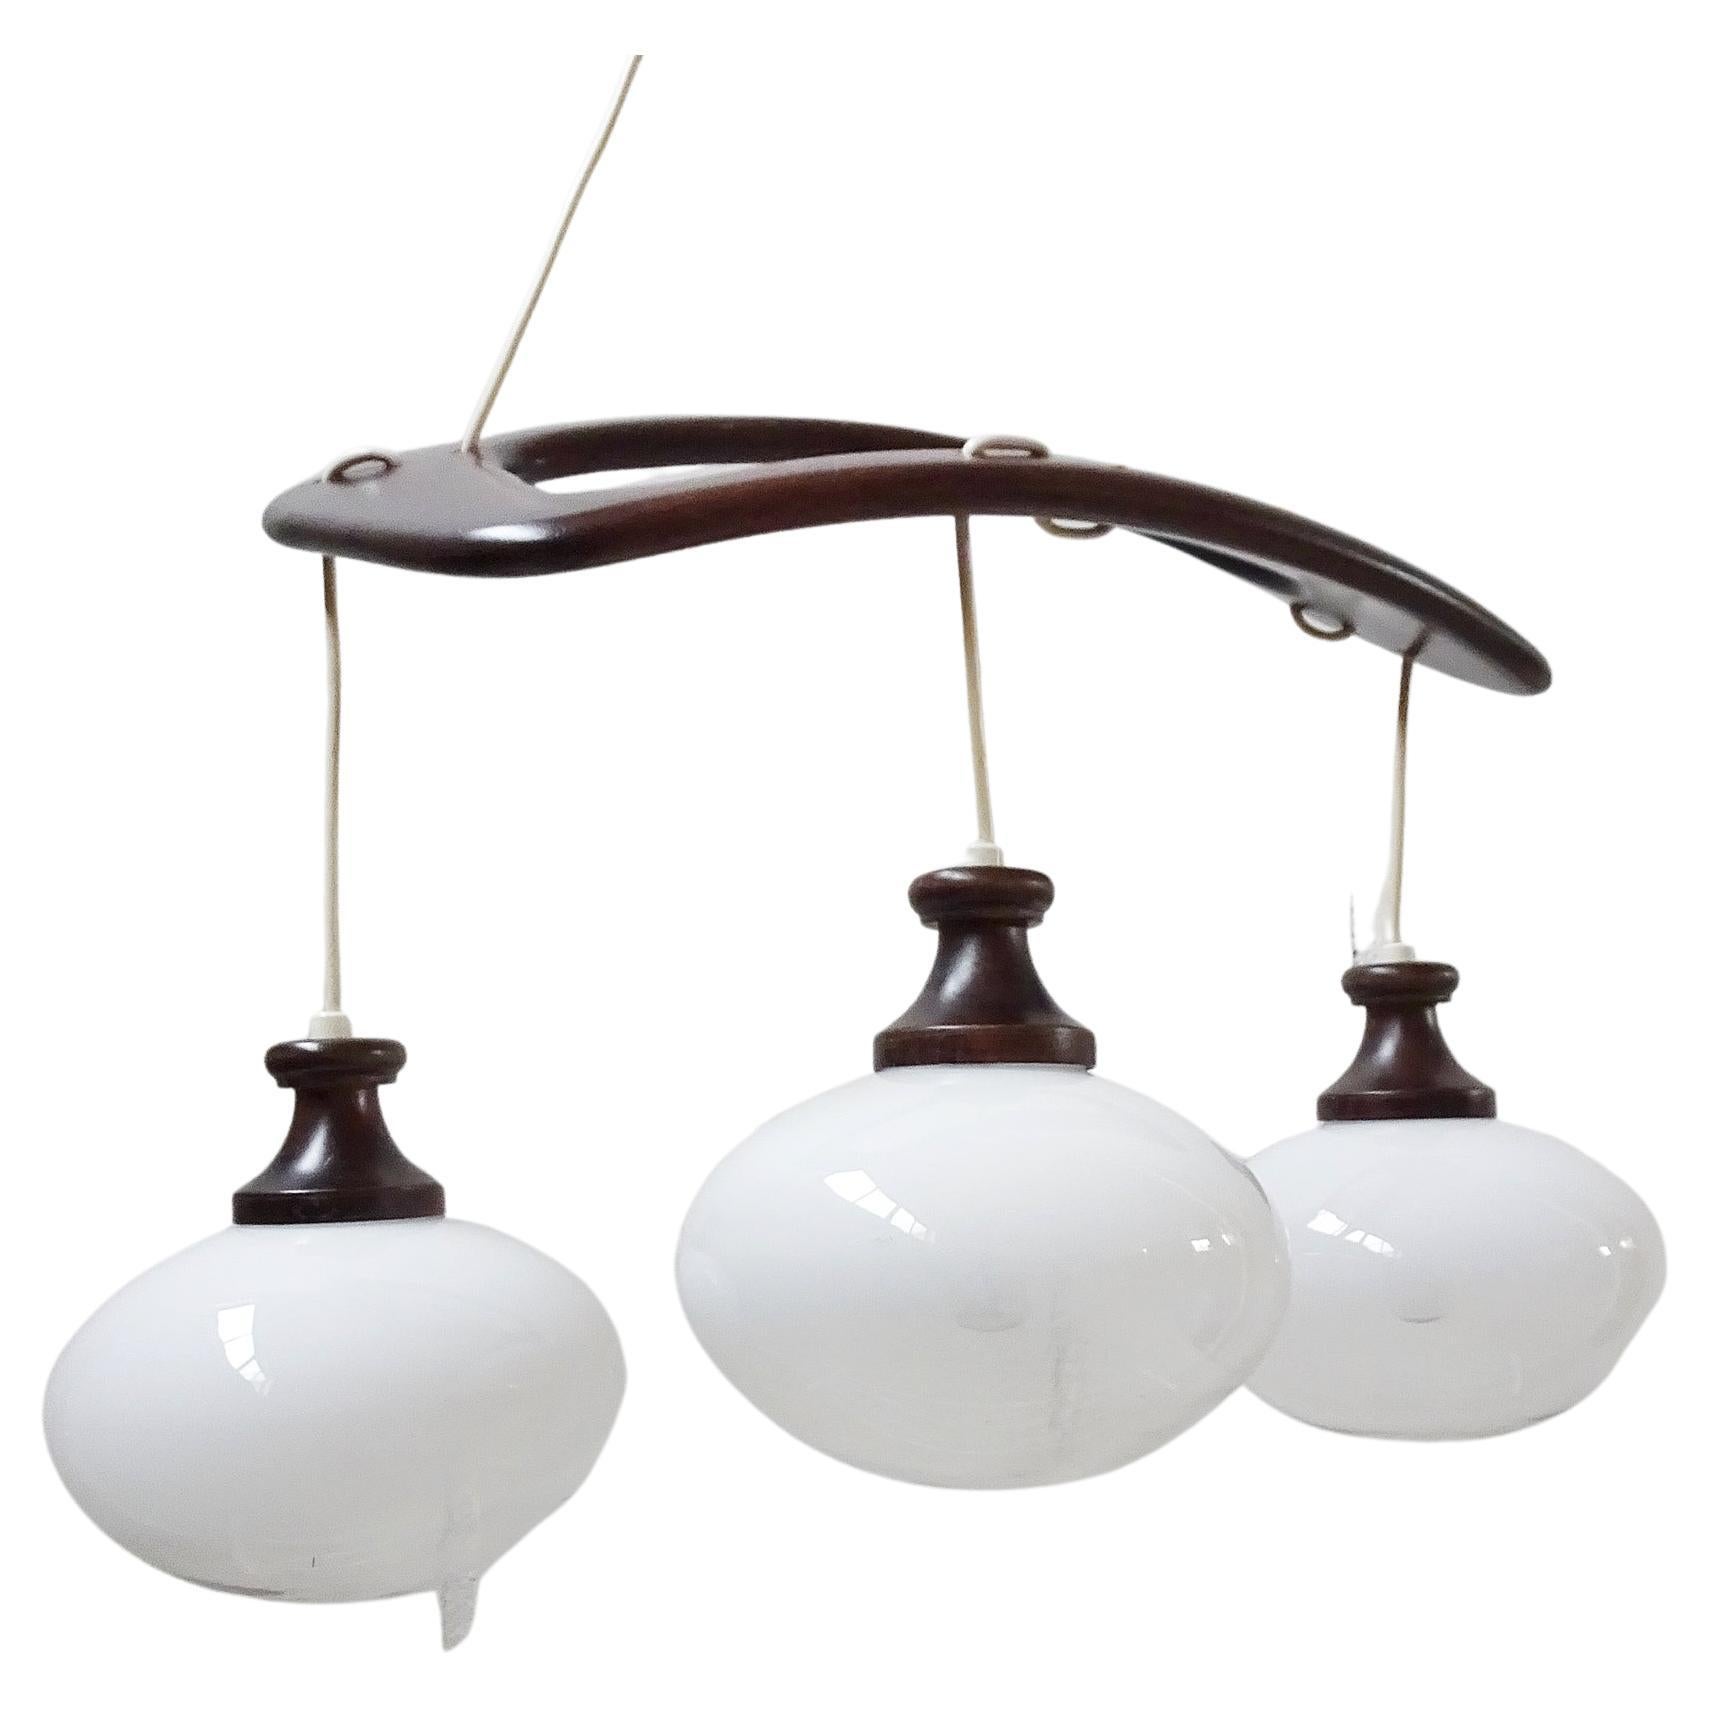 Italian pendant lamp by Mazzega from the 1960s. Shapely mid-century design made of arched teak wood and three glass balls. The semi-tinted glass makes it the ideal pendant lamp above the table.

Lamp socket 3 x E14, the delivery takes place with